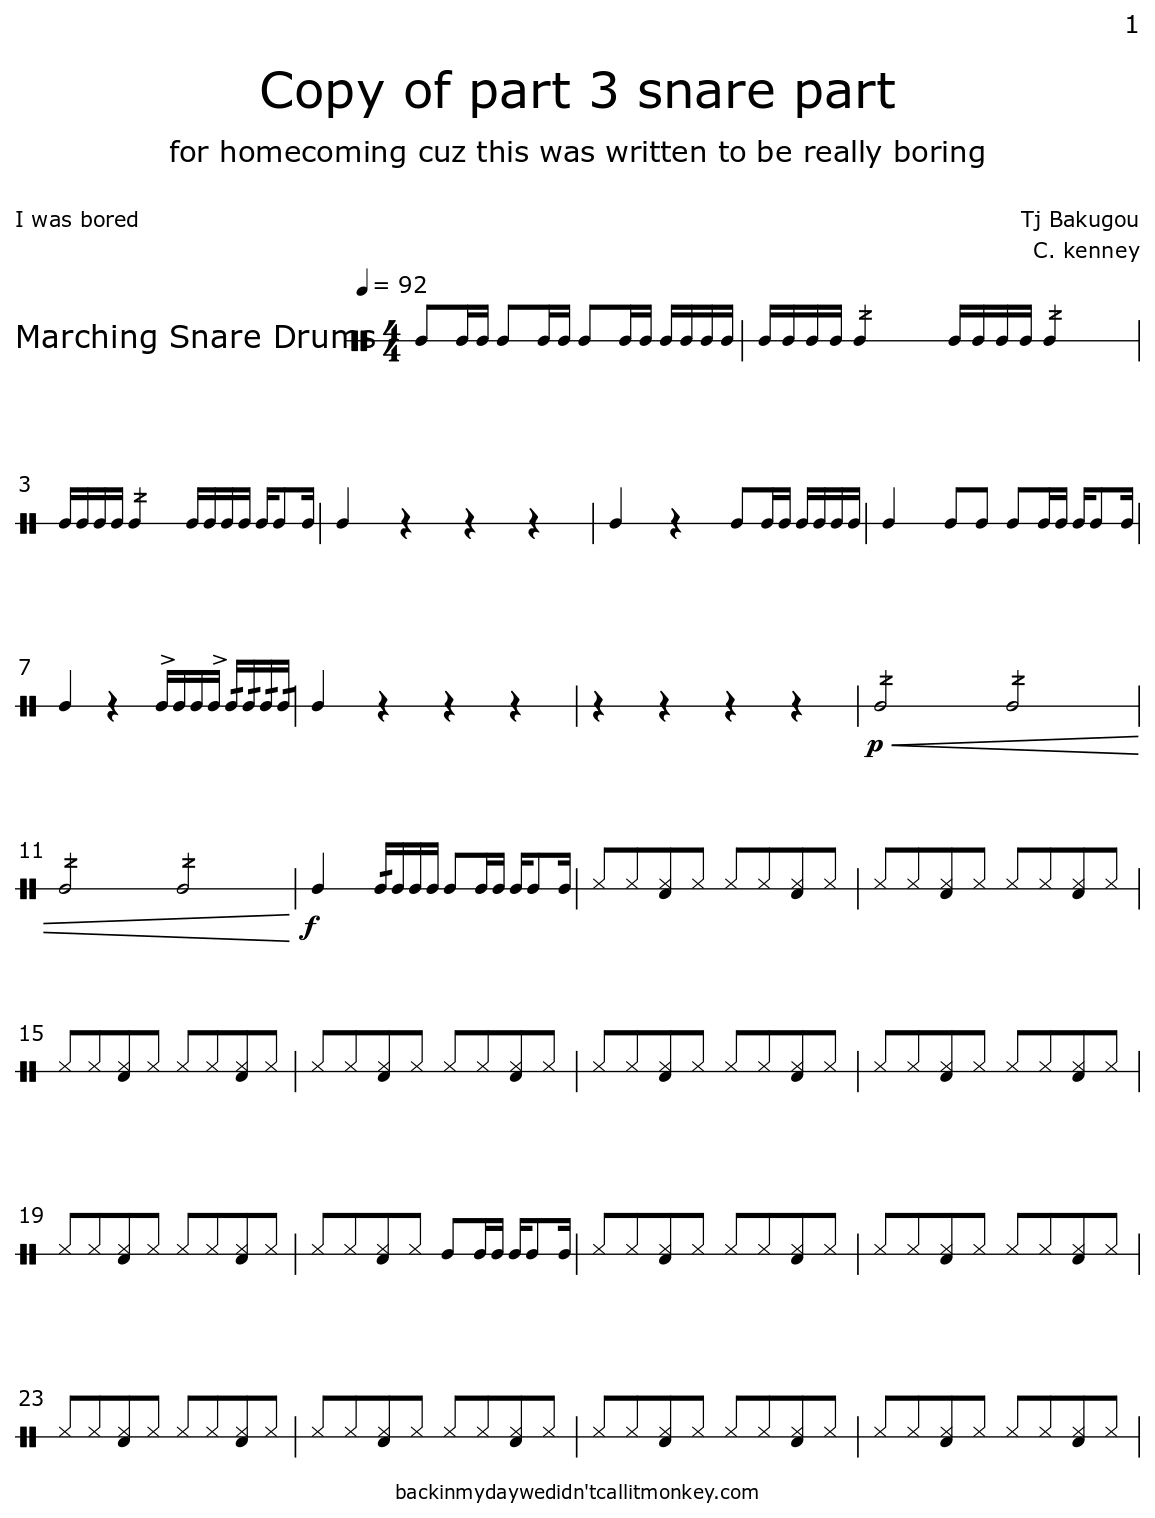 Copy of part 3 snare part - Sheet music for Marching Snare Drums